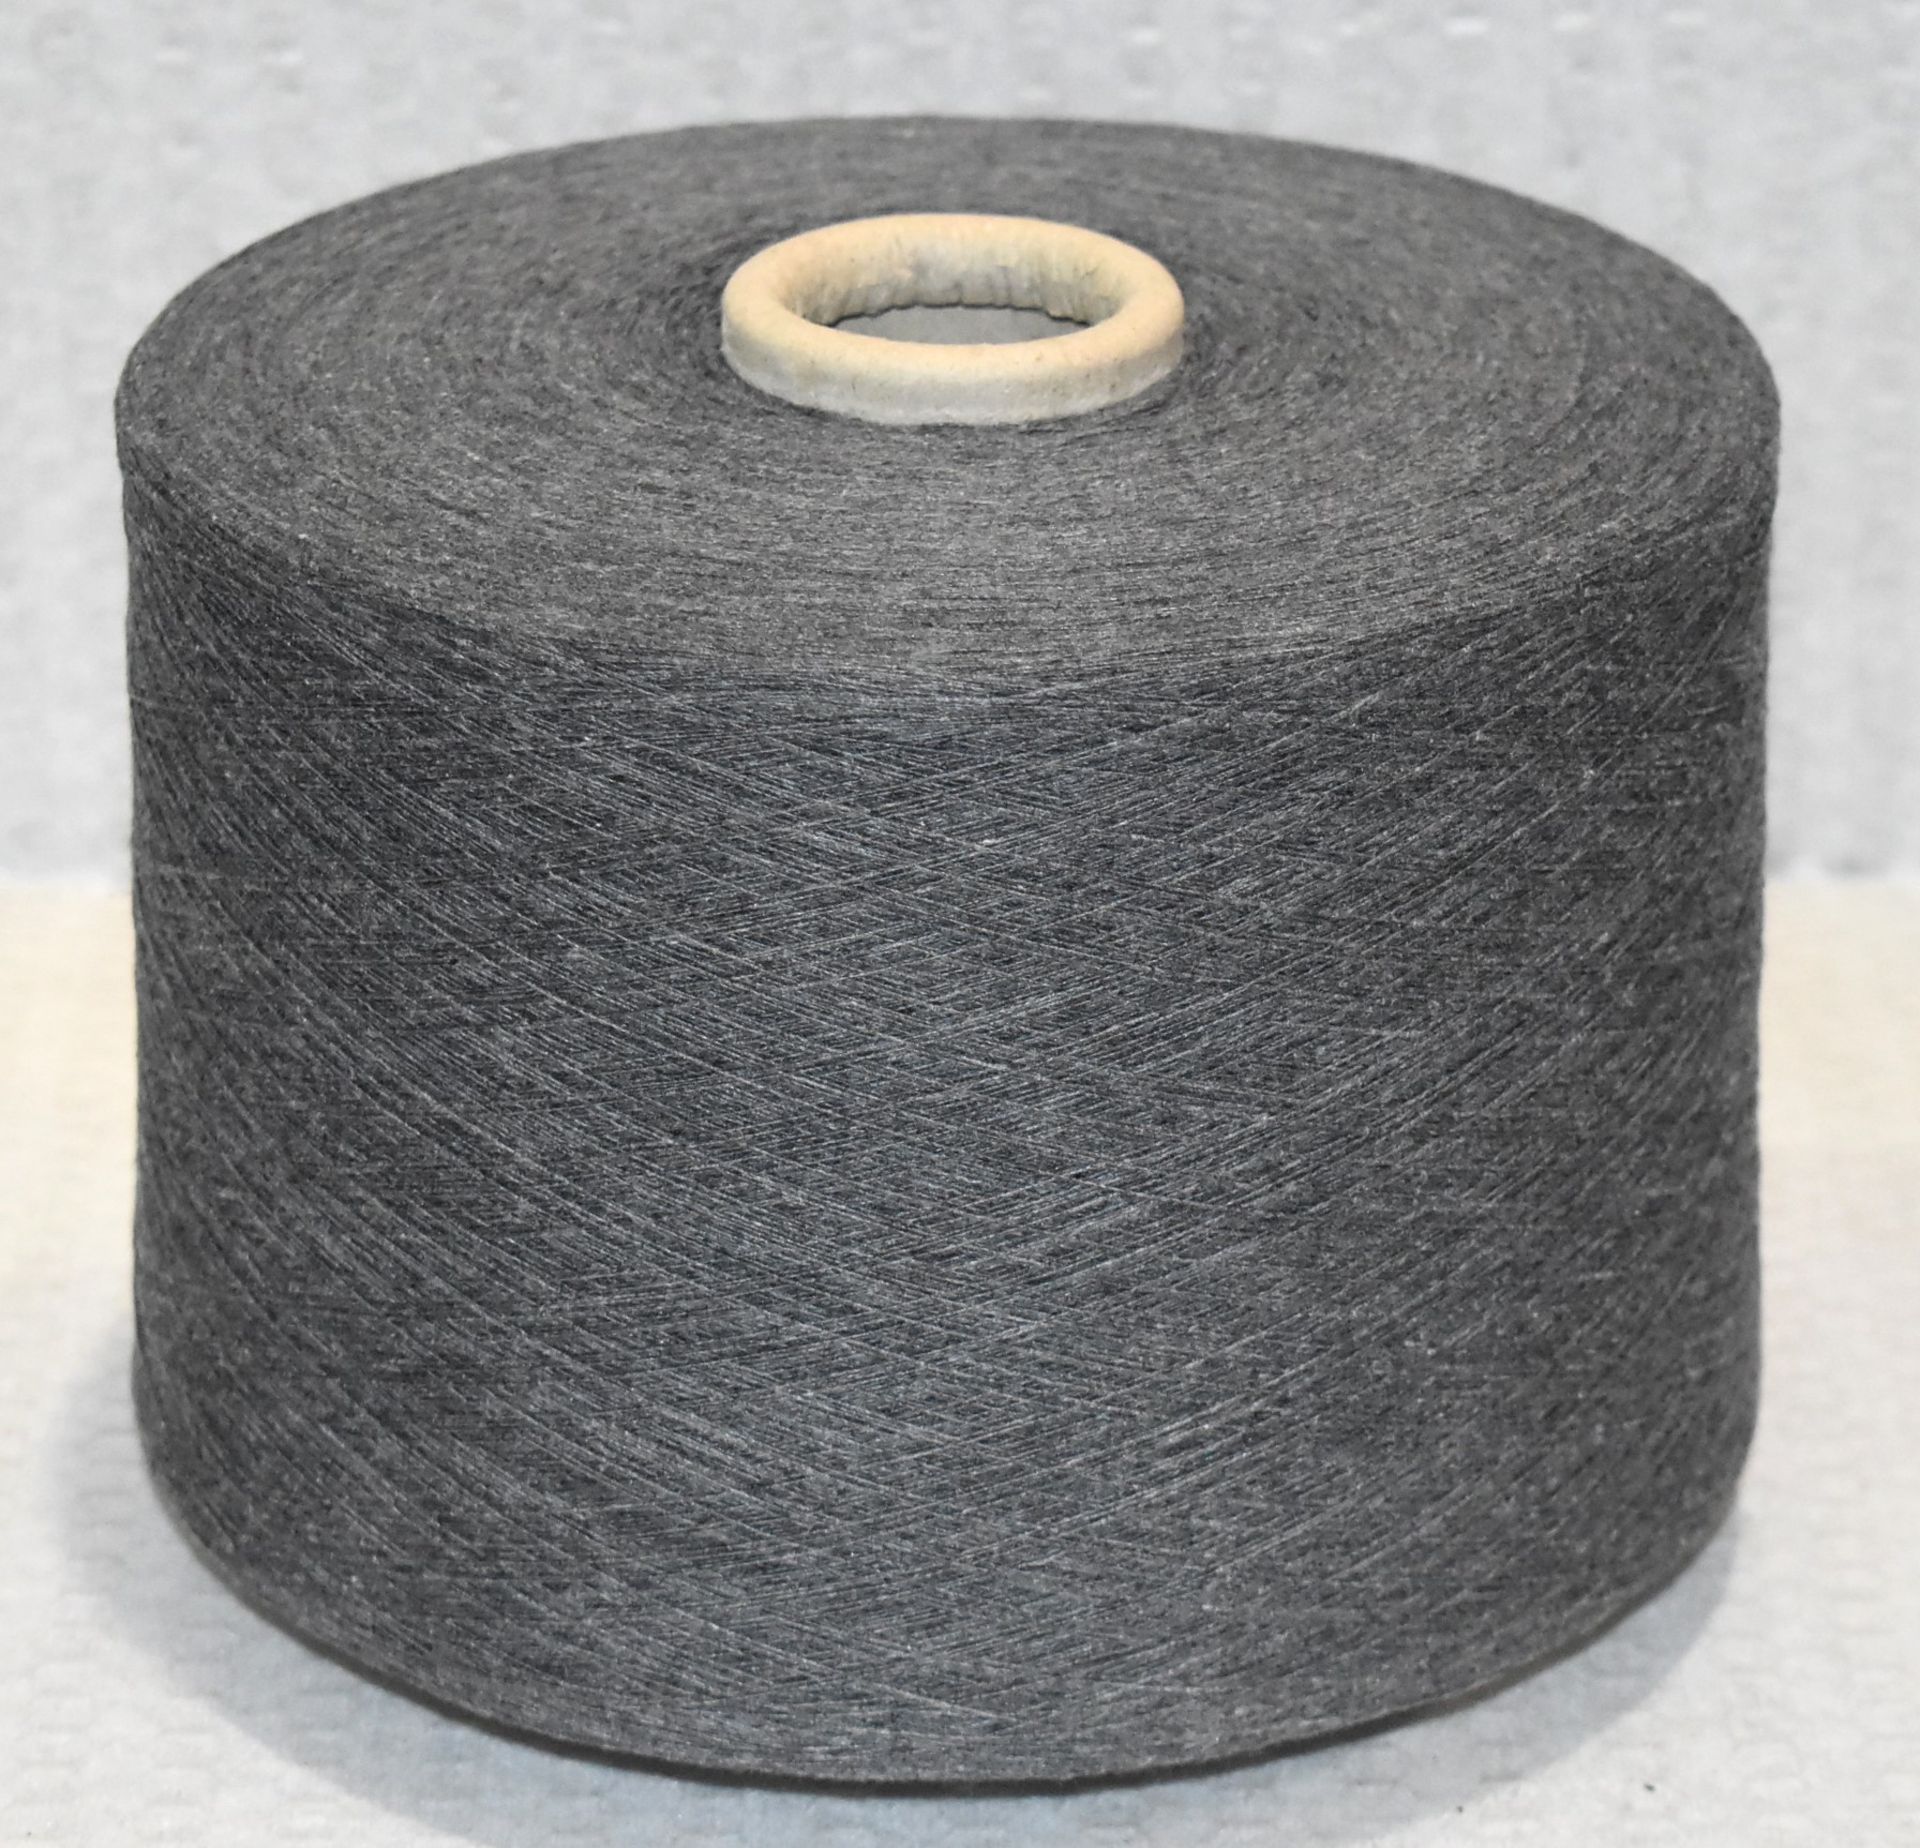 1 x Cone of 1/13 MicroCotton Knitting Yarn - Mid Grey - Approx Weight: 2,500g - New Stock ABL Yarn - Image 3 of 18